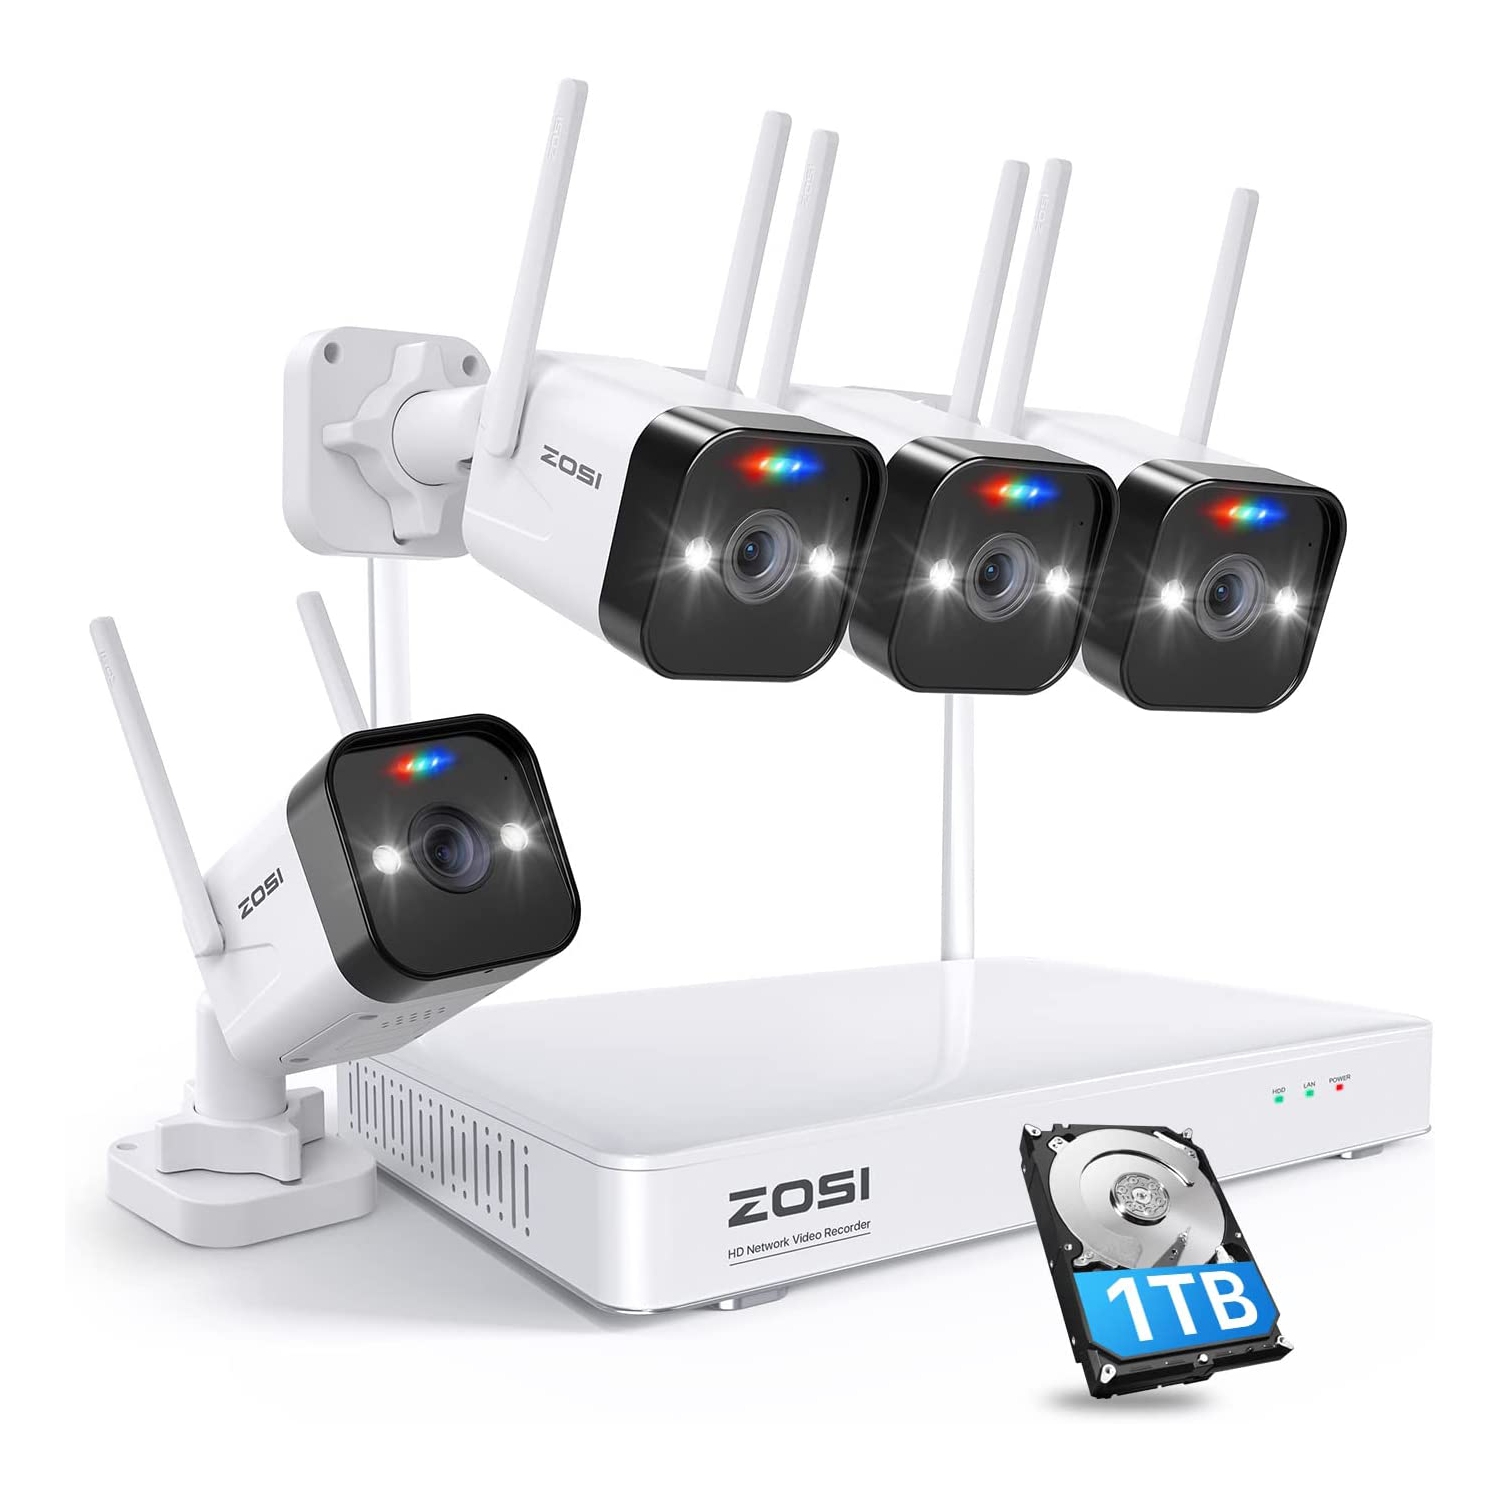 ZOSI H.265+ 8CH 3MP 2K NVR Home Security Camera System with 2TB HDD, 4pcs Wireless WiFi Outdoor Spotlight Surveillance Cameras, 2-Way Audio, Color Night Vision